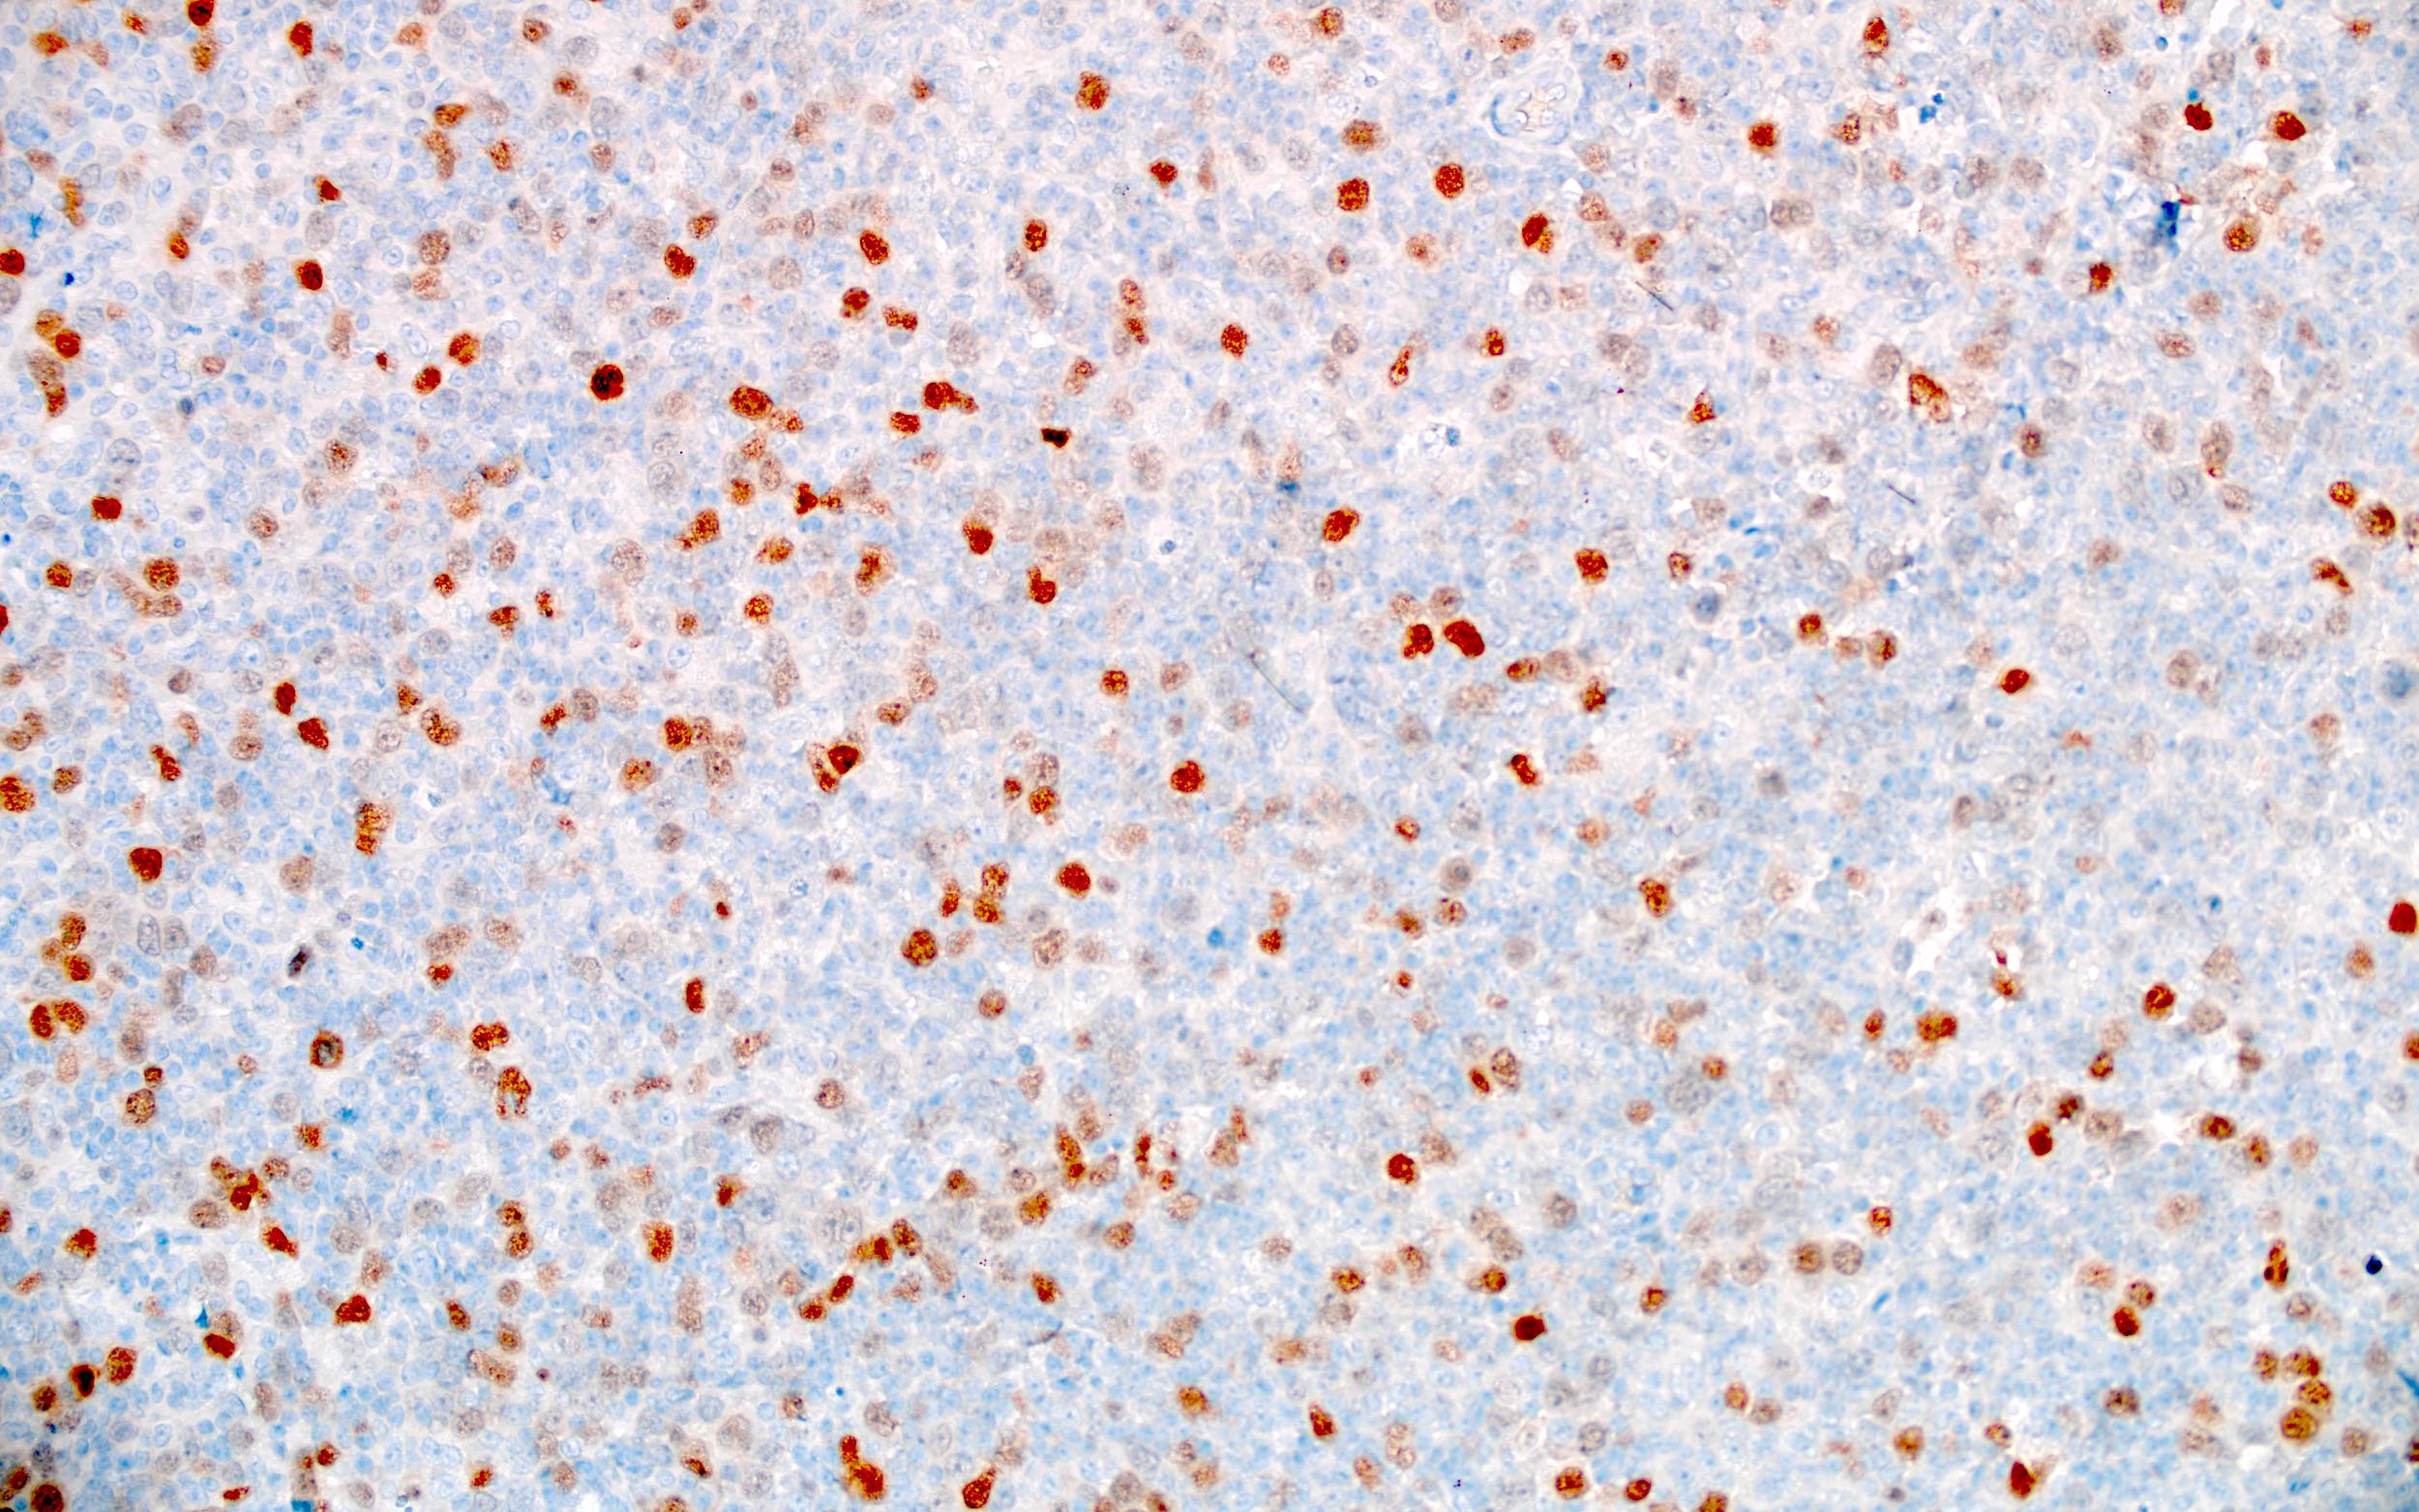 Large atypical cells of DLBCL, MUM1 variable